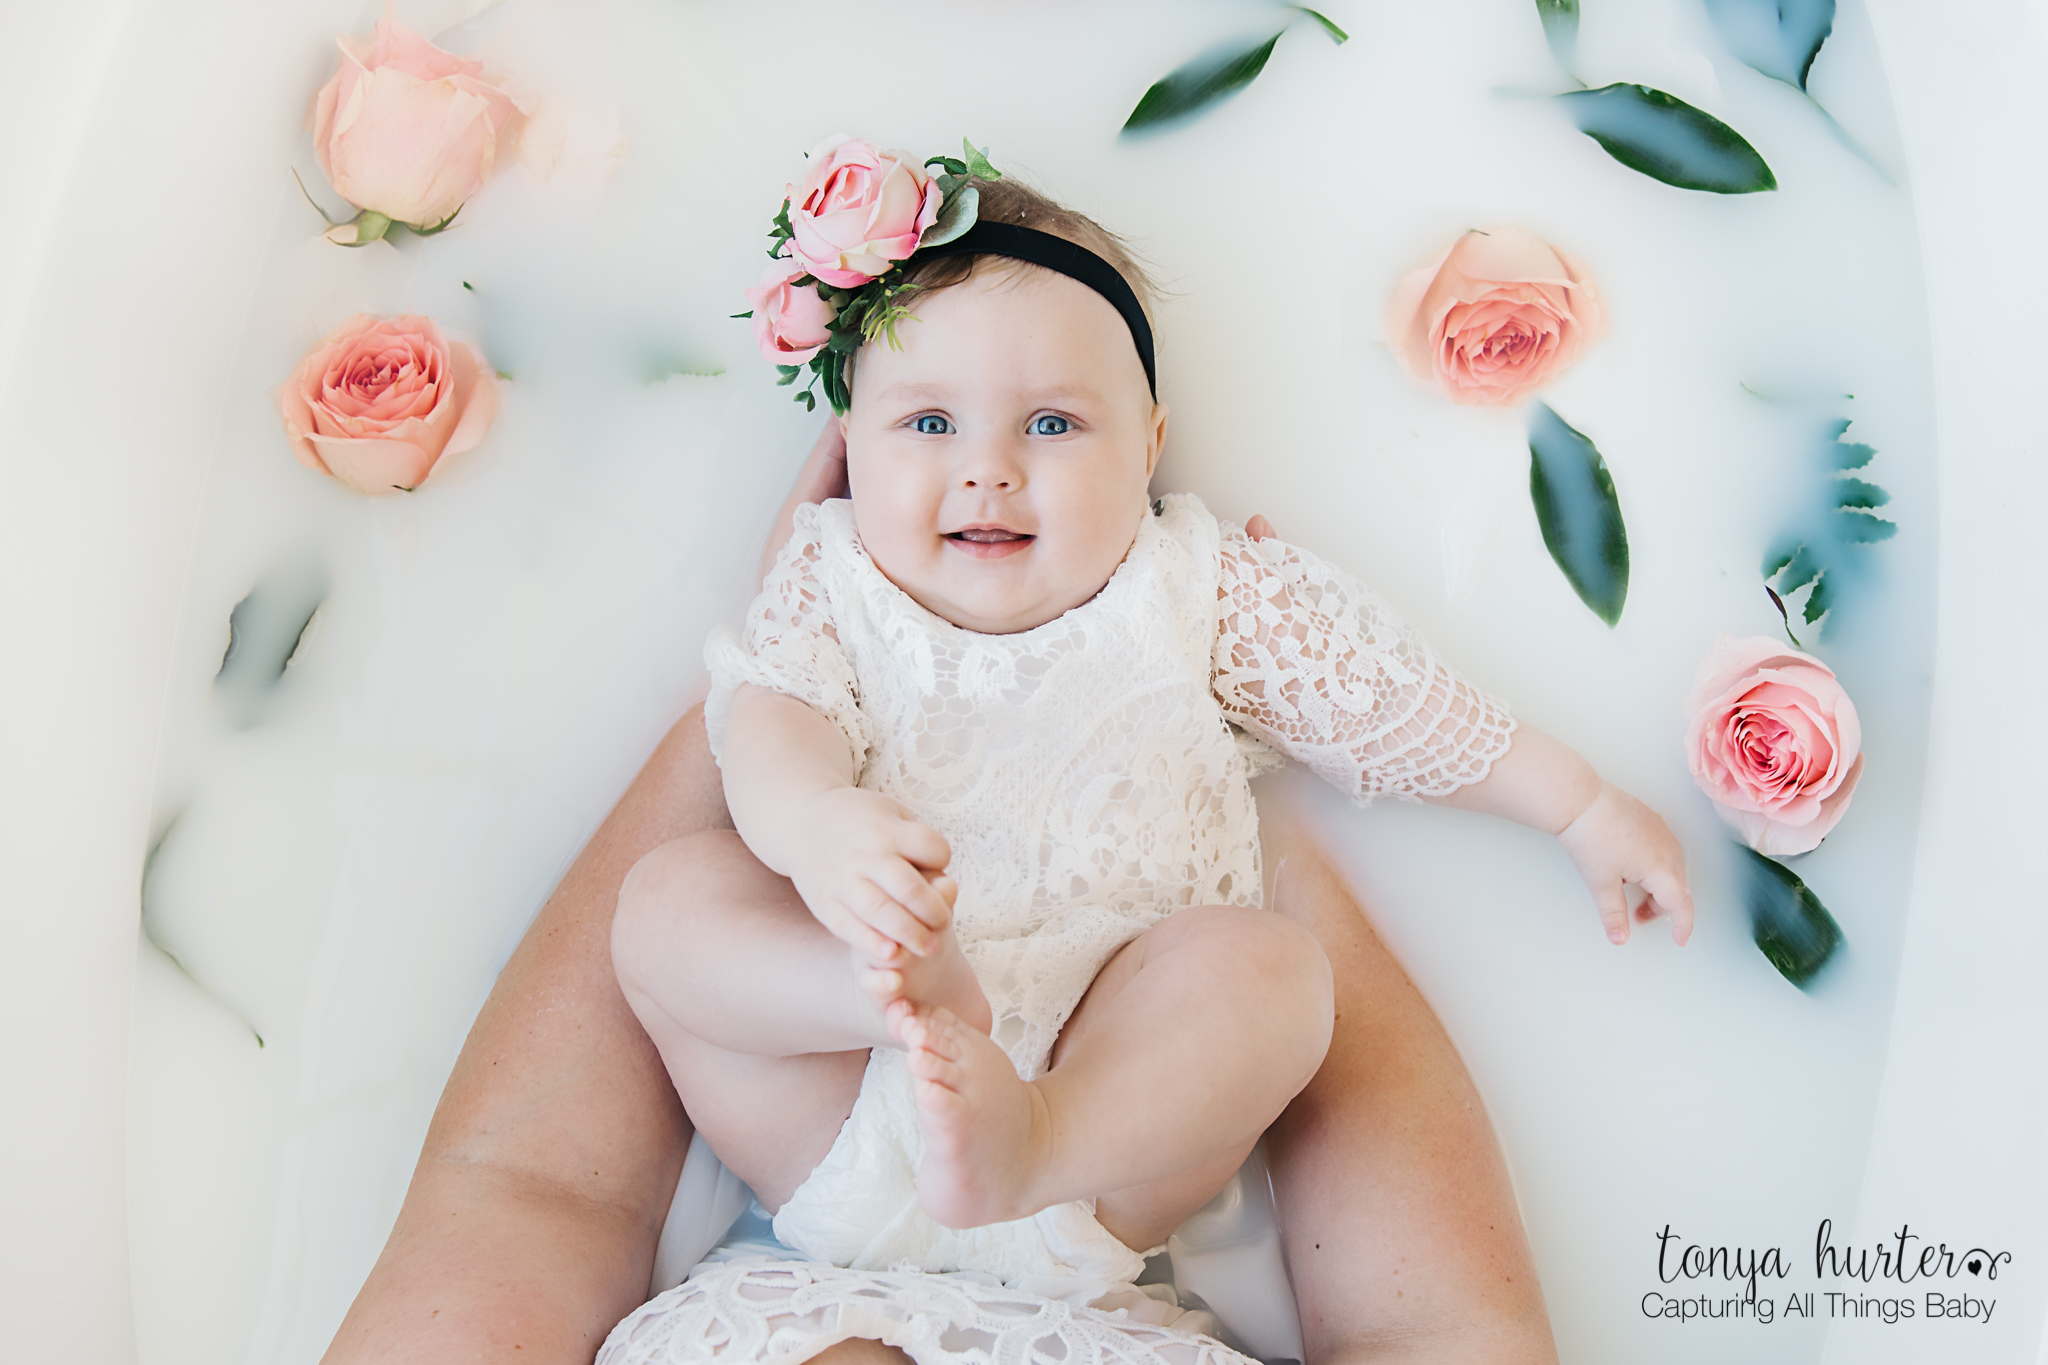 Mother and baby milk bath photo shoot